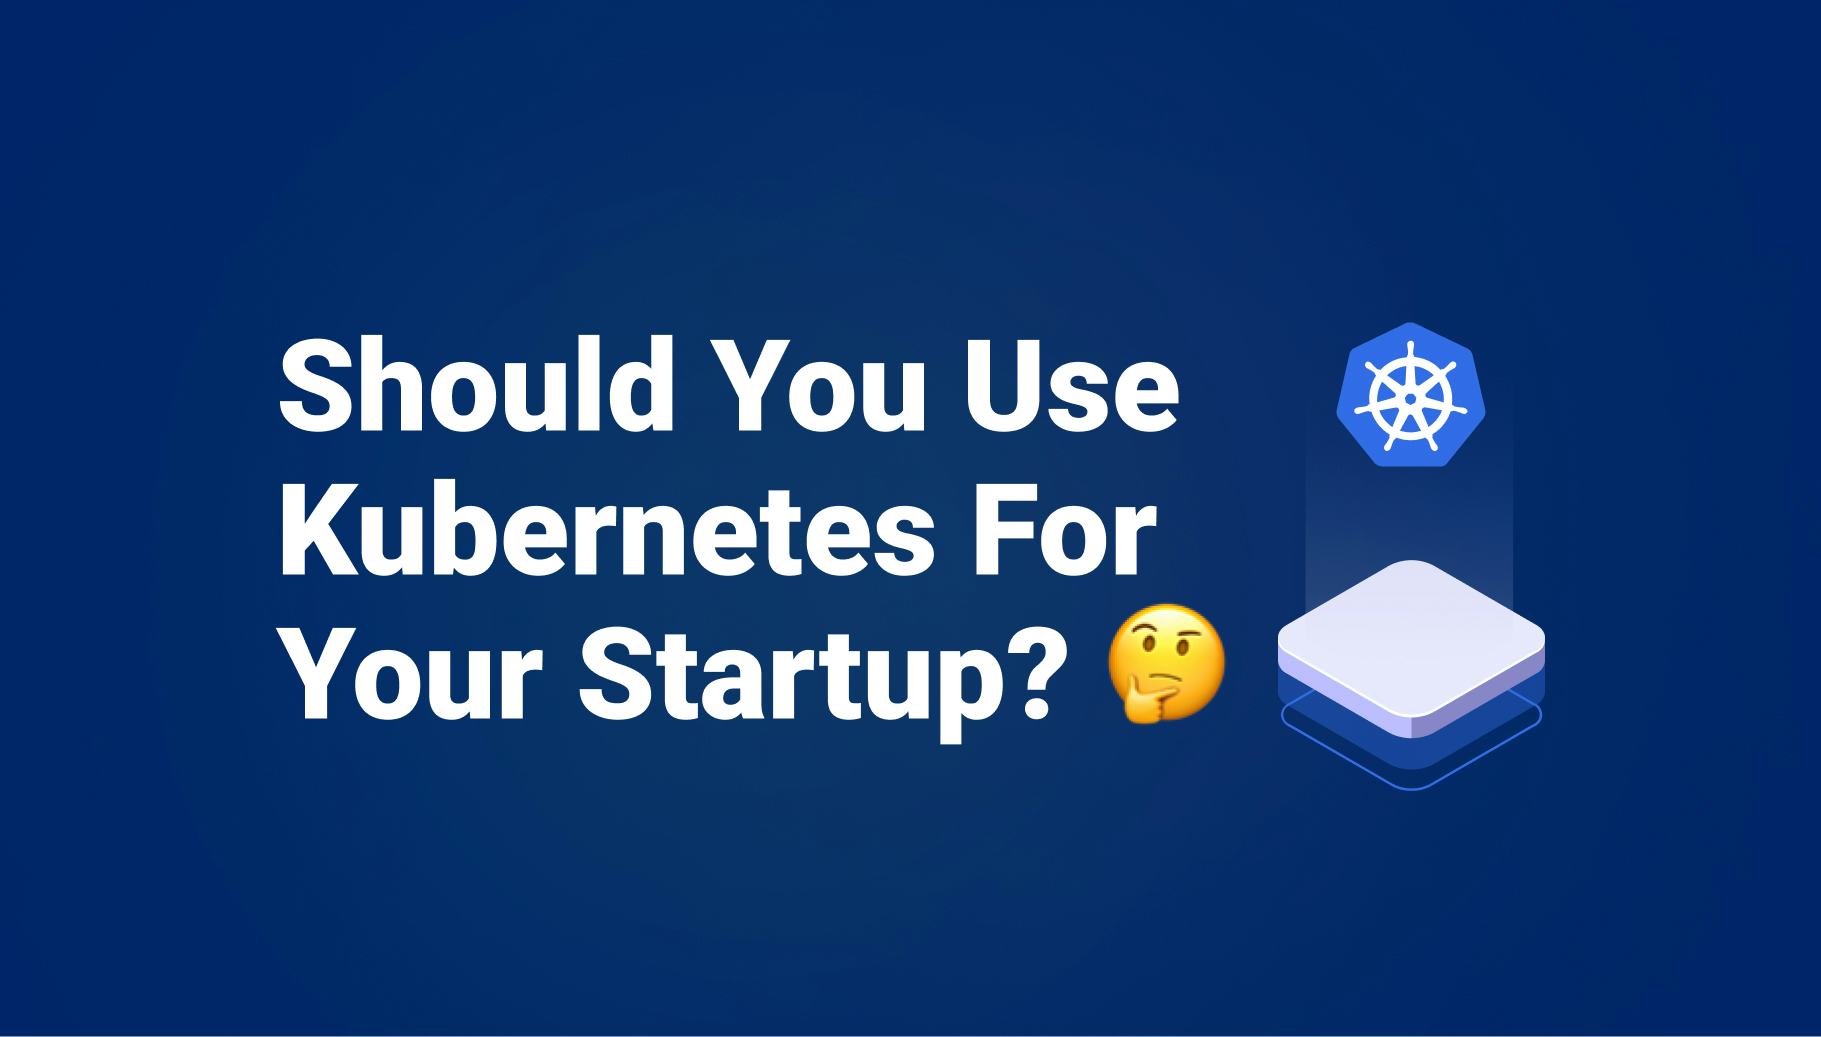 Should you use Kubernetes for your Startup?